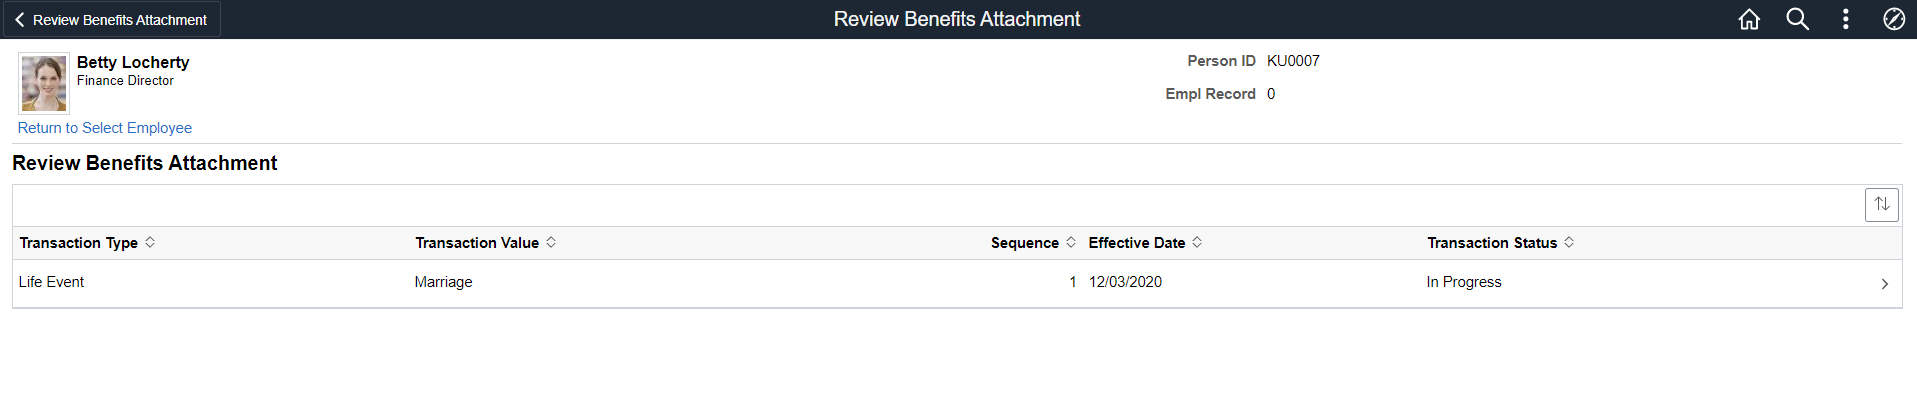 Review Benefits Attachment Page 2